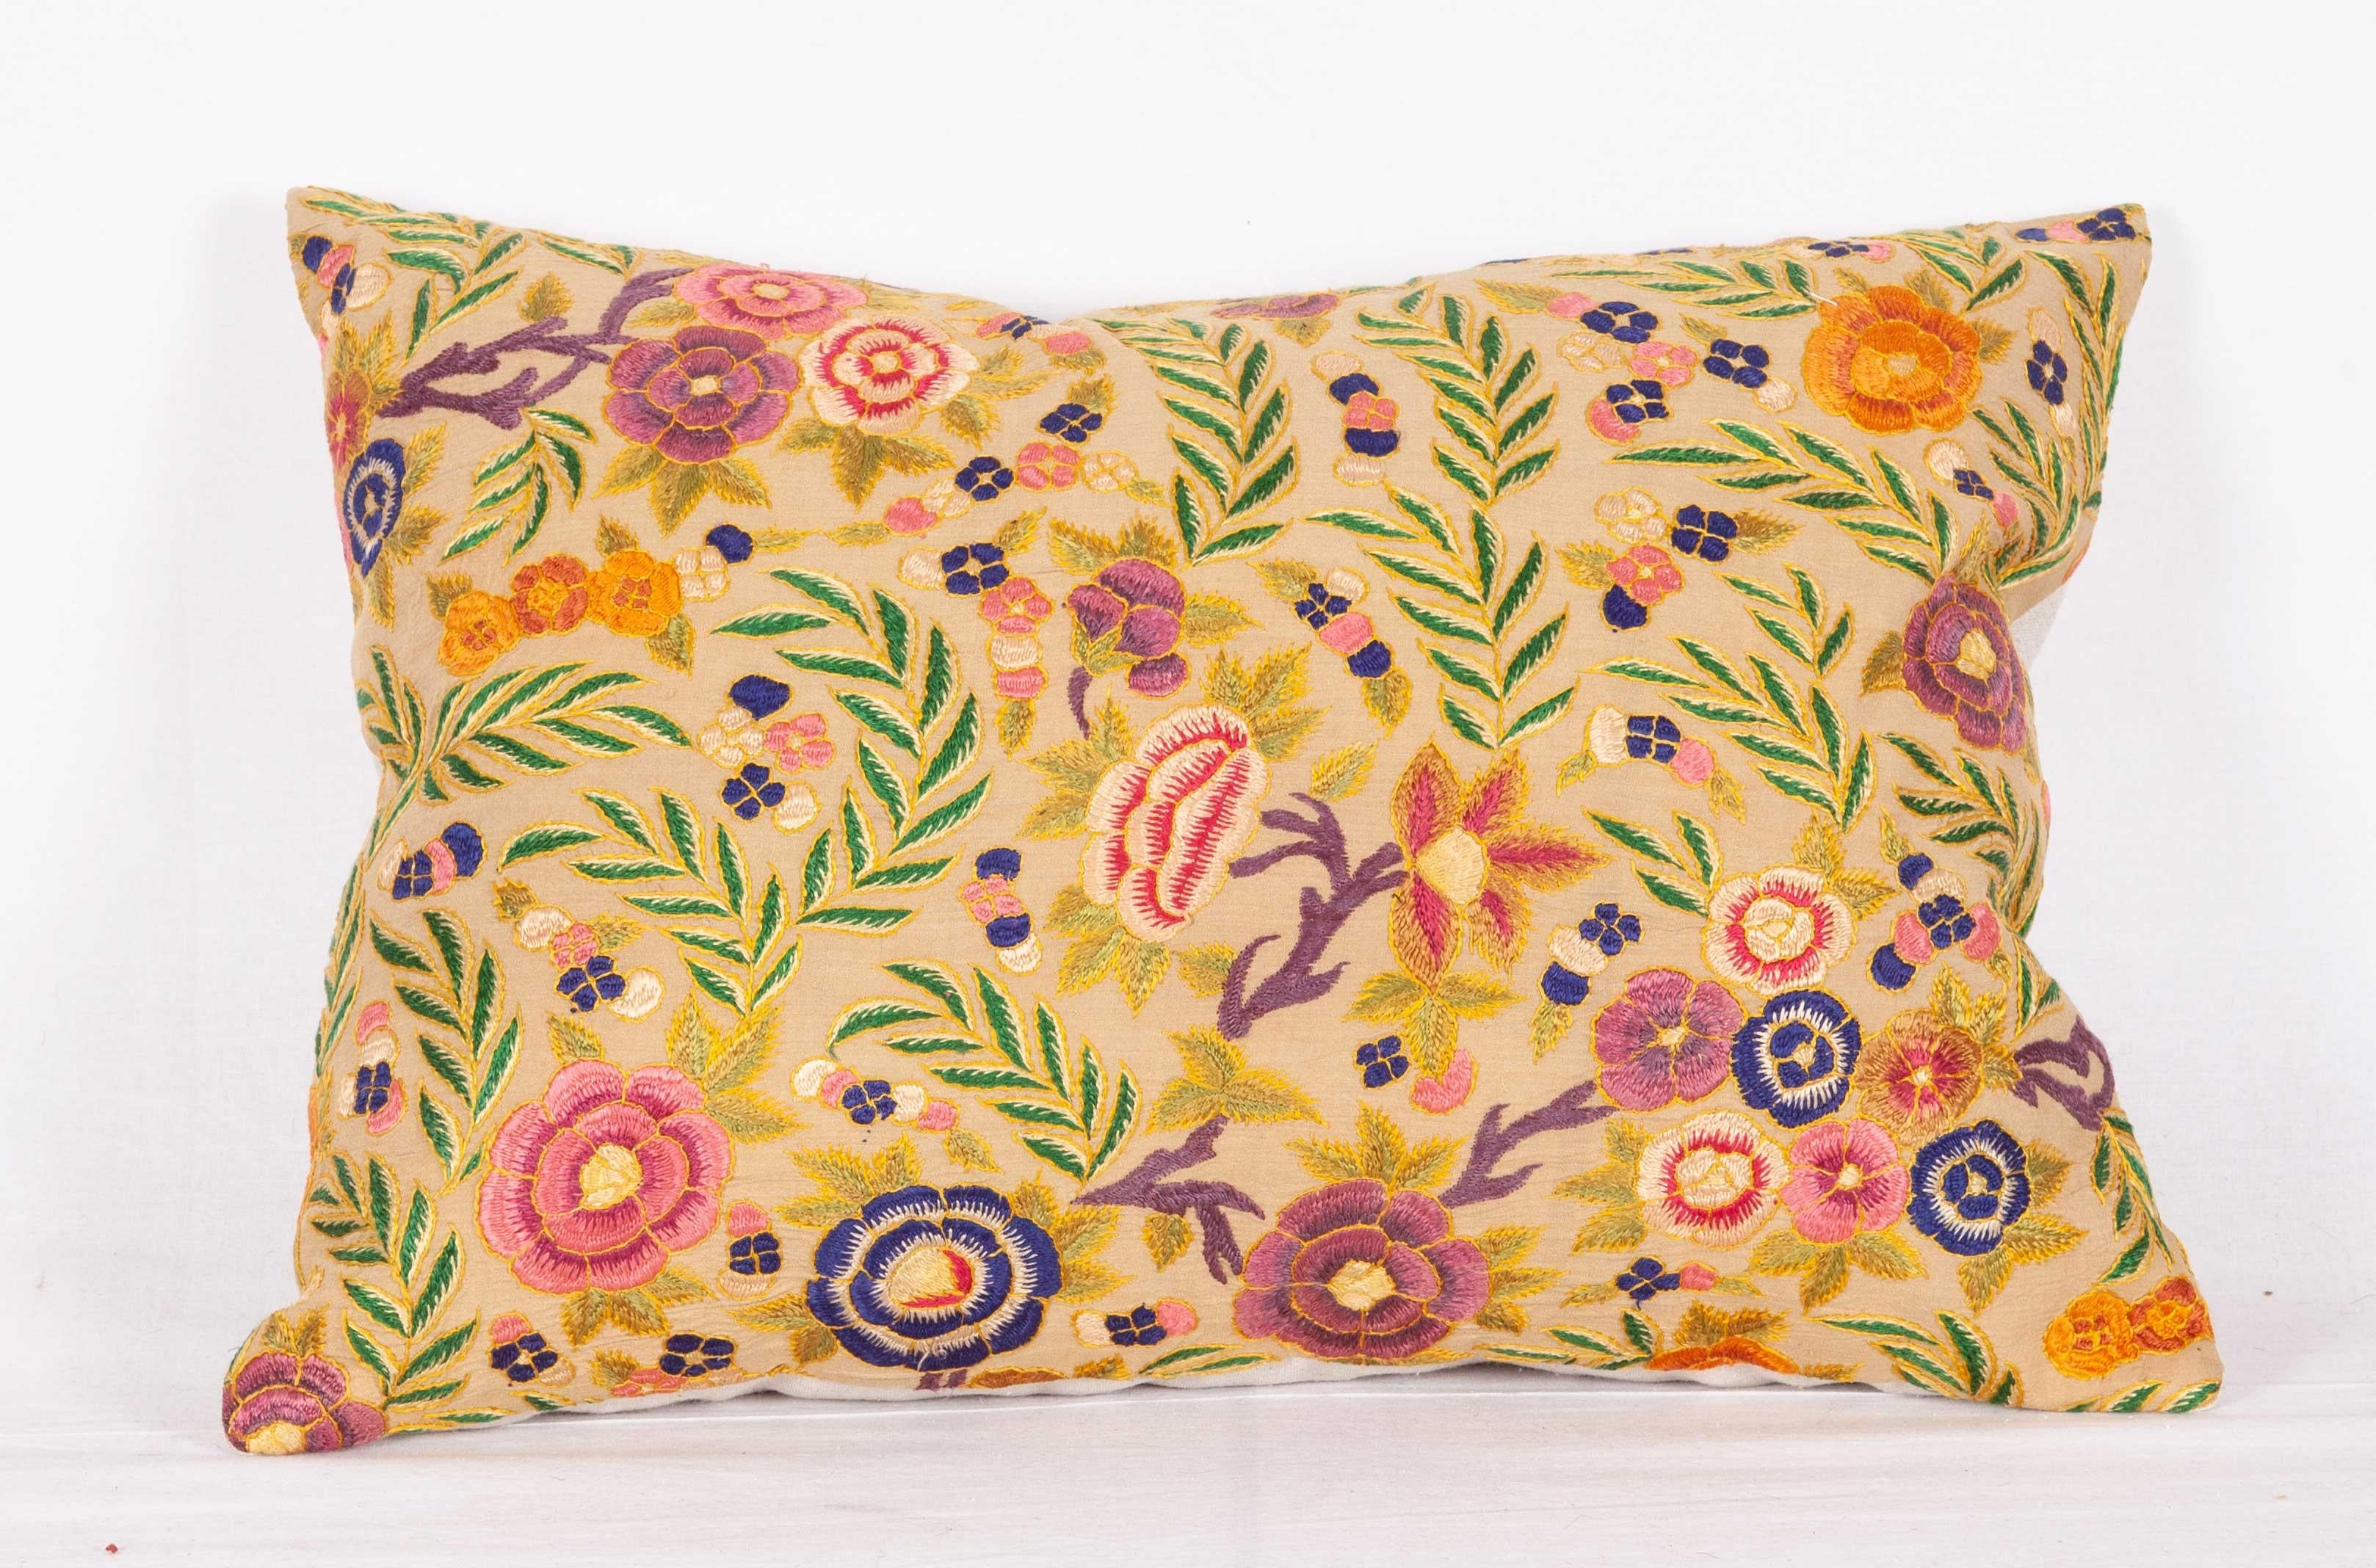 Indian Pillow Cases Fashioned from an Early 20th Century Embroidery